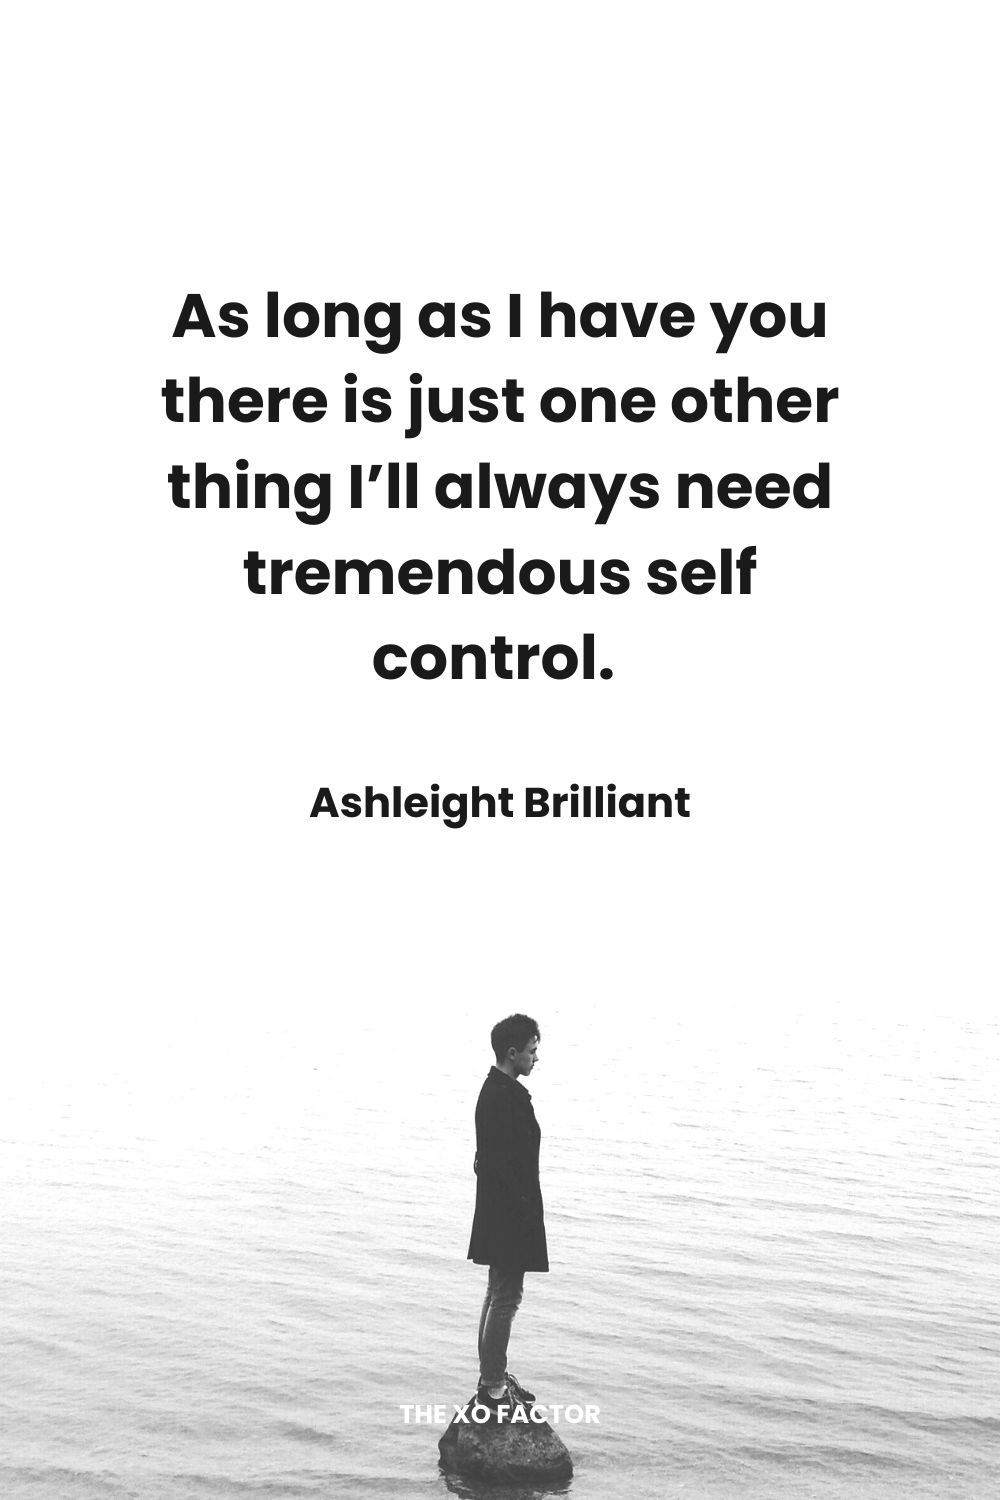 As long as I have you there is just one other thing I’ll always need tremendous self control.  Ashleight Brilliant